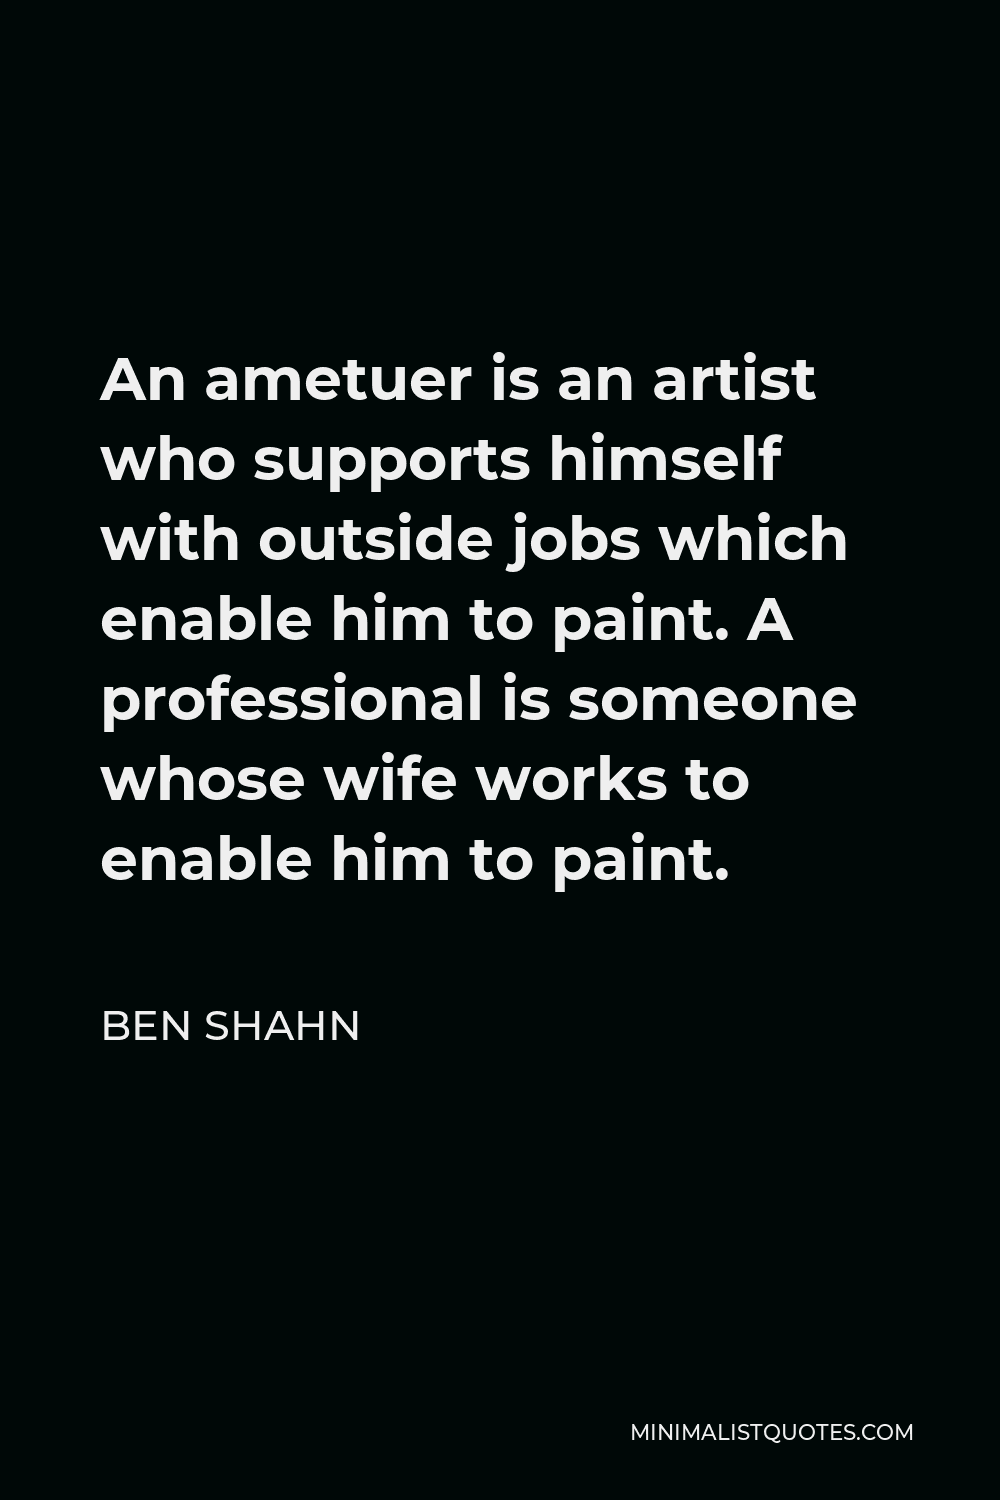 Ben Shahn Quote - An ametuer is an artist who supports himself with outside jobs which enable him to paint. A professional is someone whose wife works to enable him to paint.